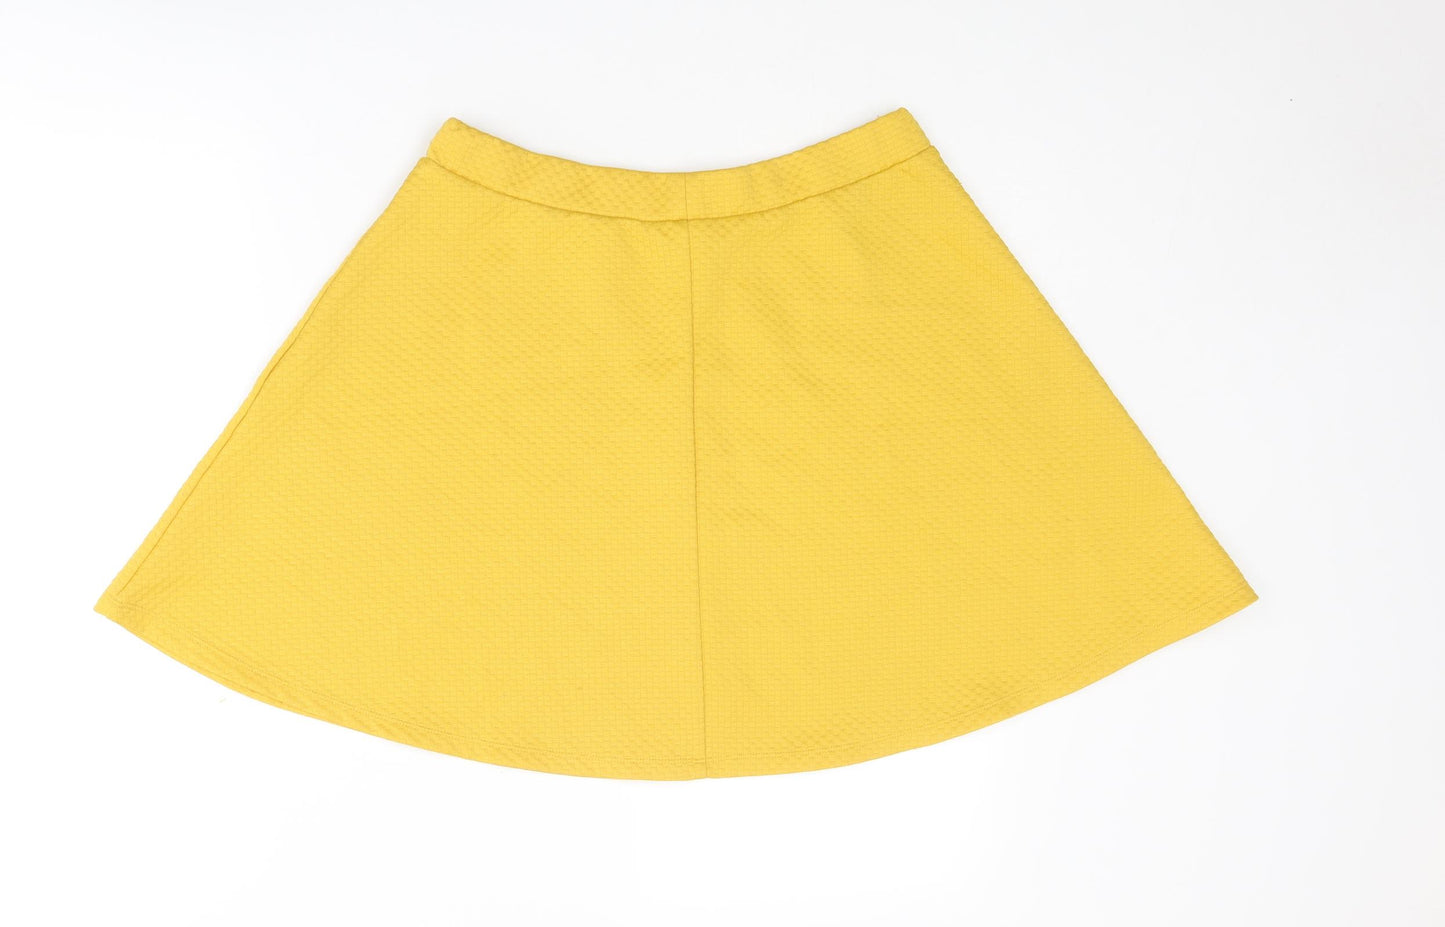 H&M Womens Yellow Polyester Skater Skirt Size M